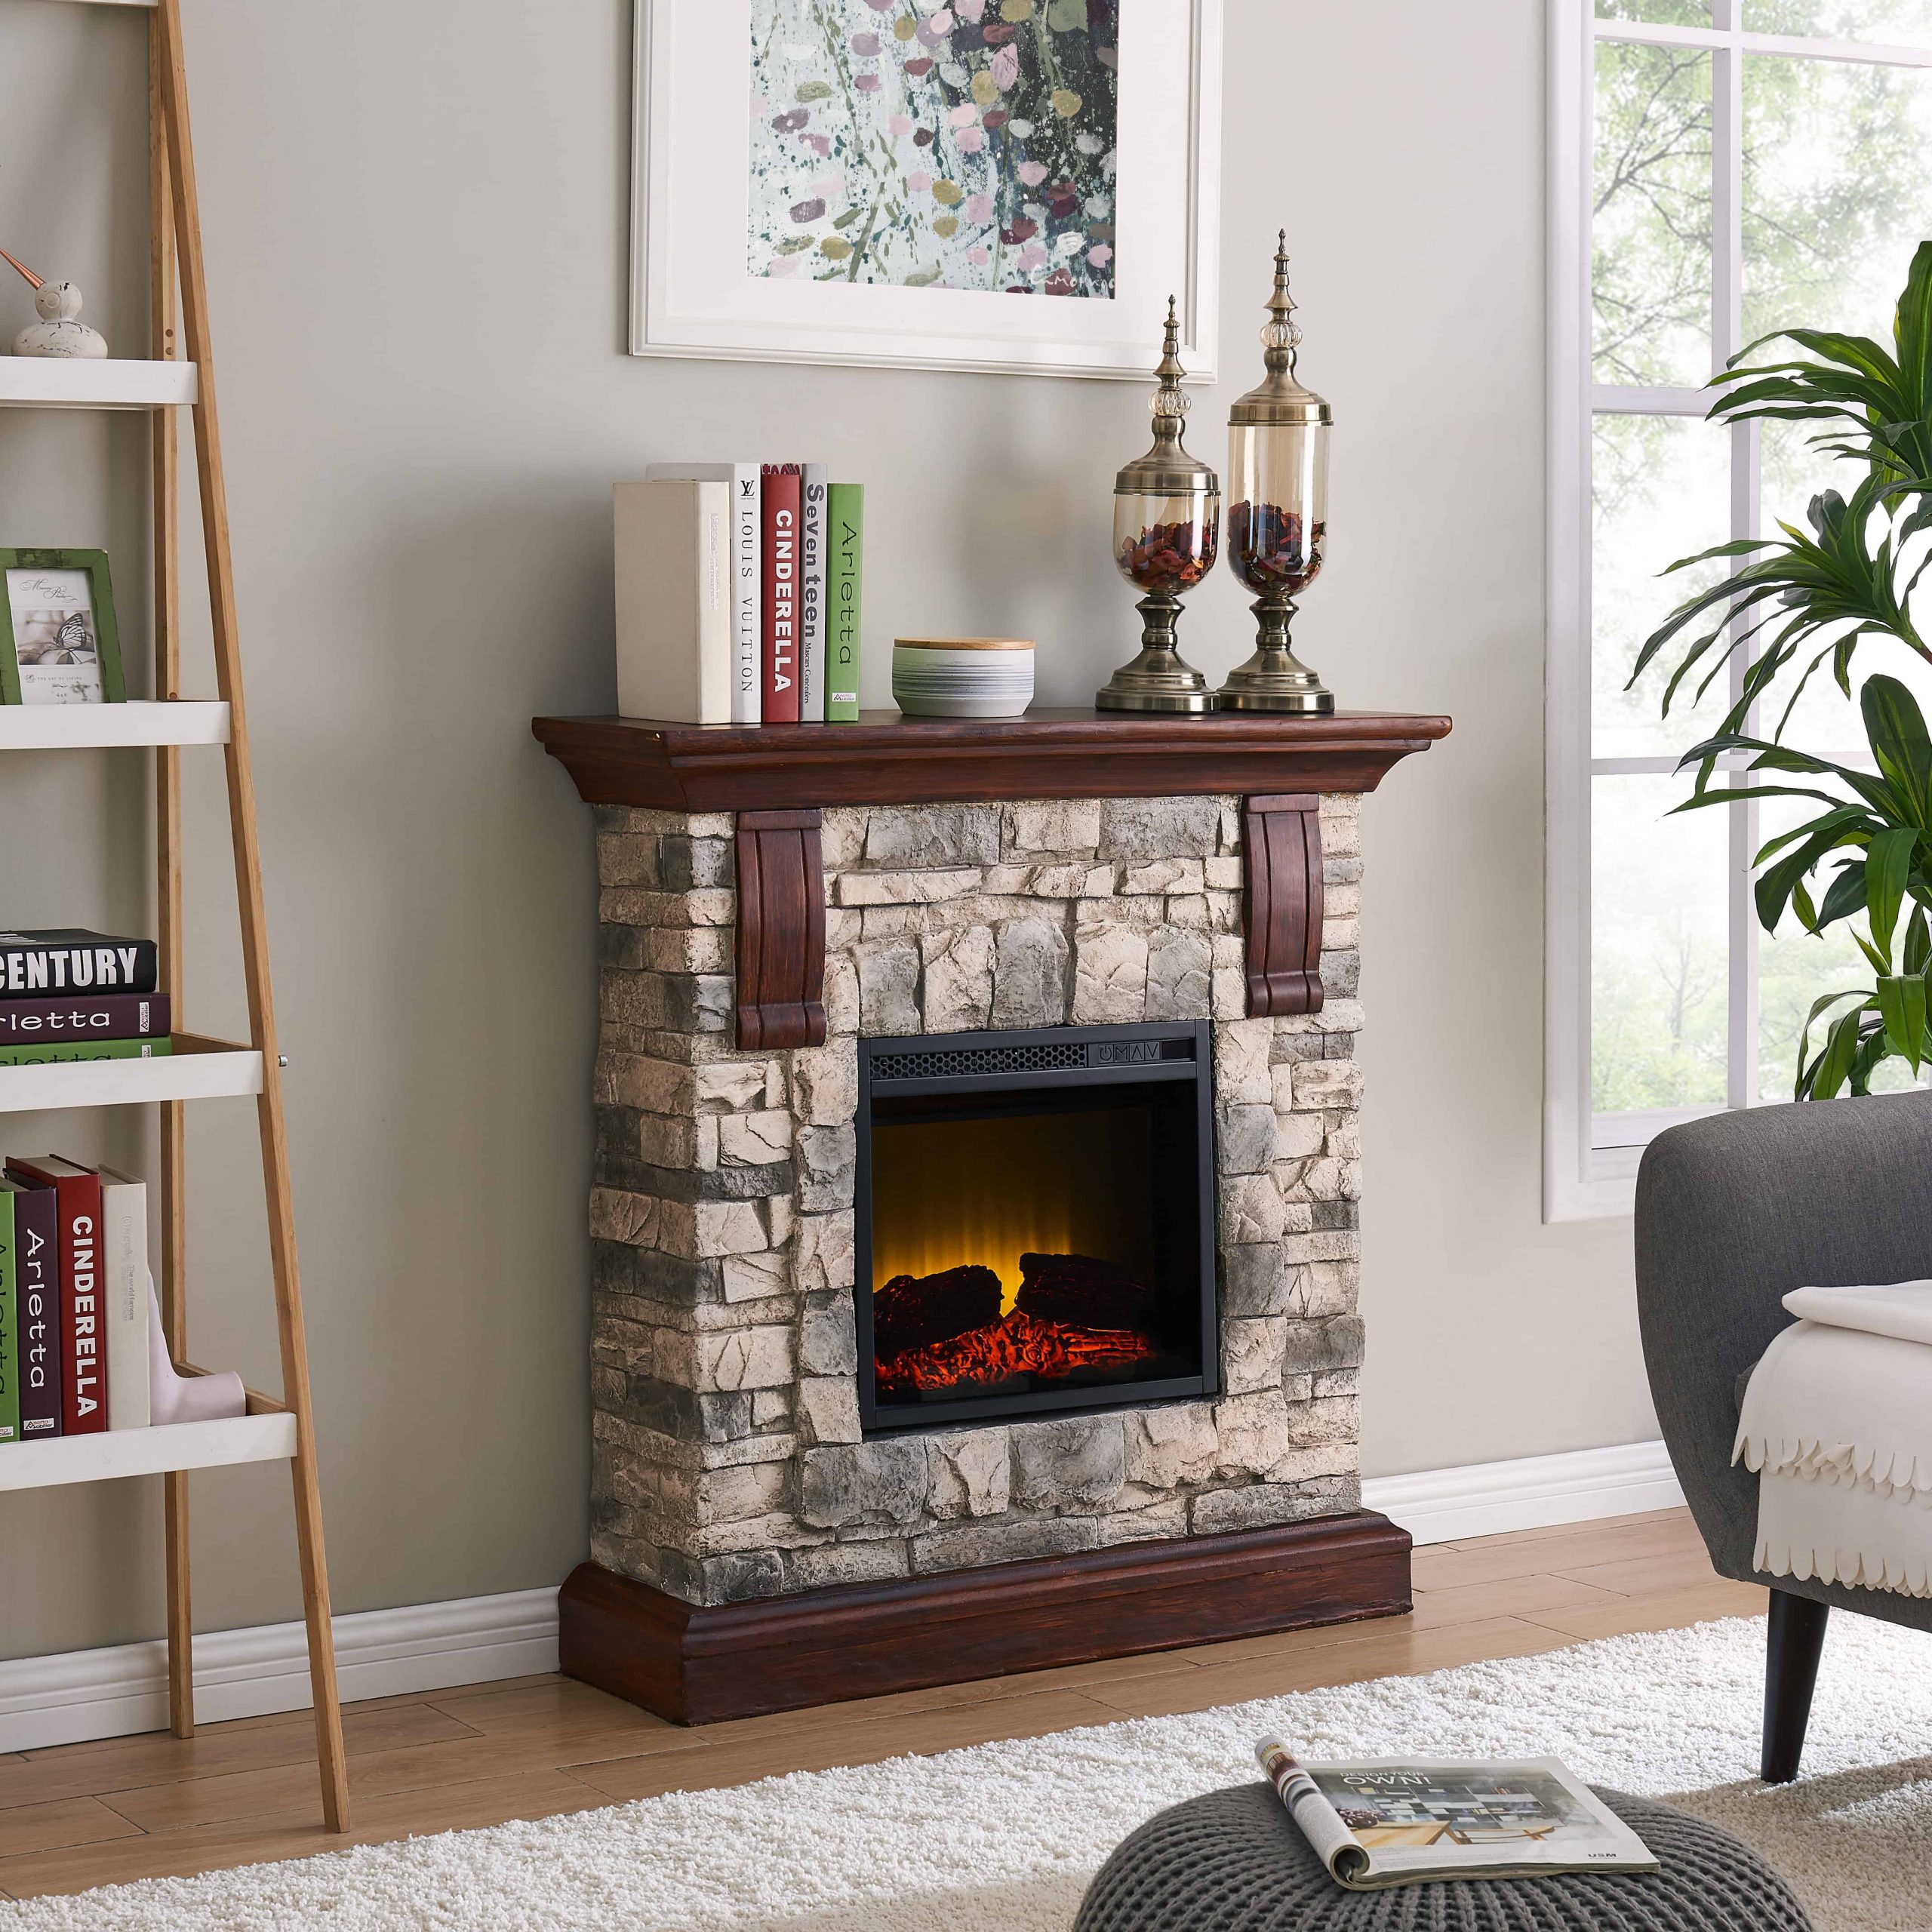 Electric fireplace with stone